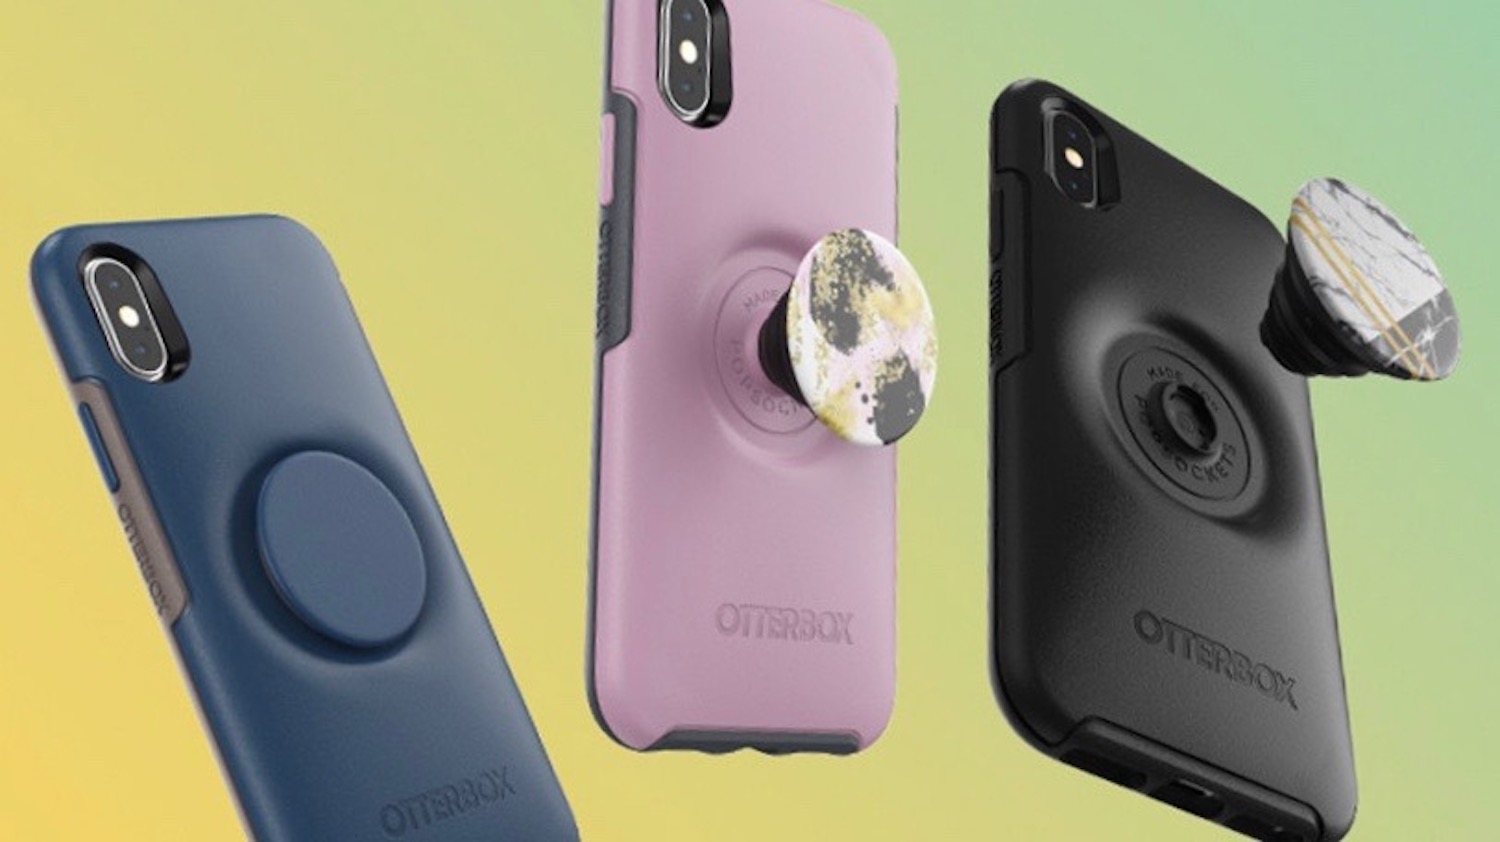 Otterbox unveils new 'Otter + Pop' case for iPhone w/ built-in customizable PopSocket